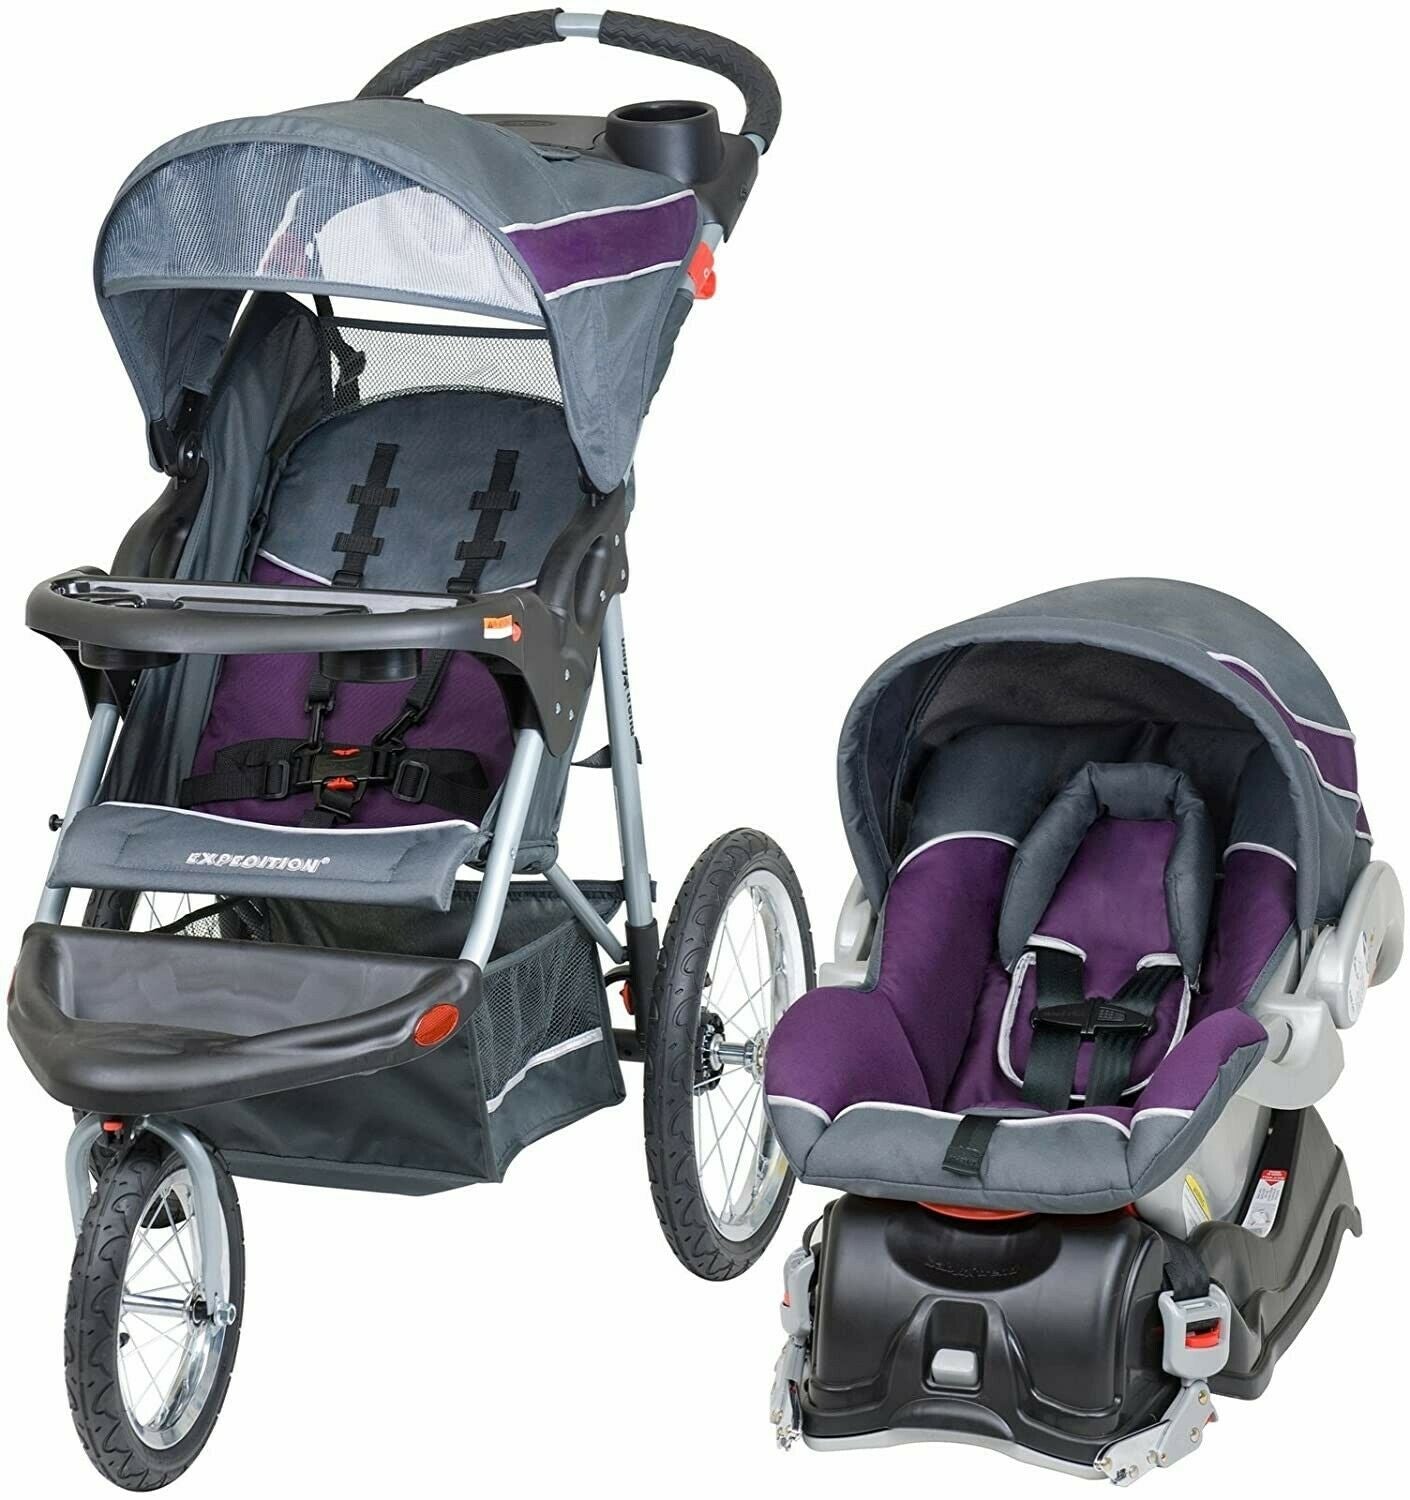 New Baby Jogger Stroller Travel System with Car Seat Playard Nursery Diaper Bag